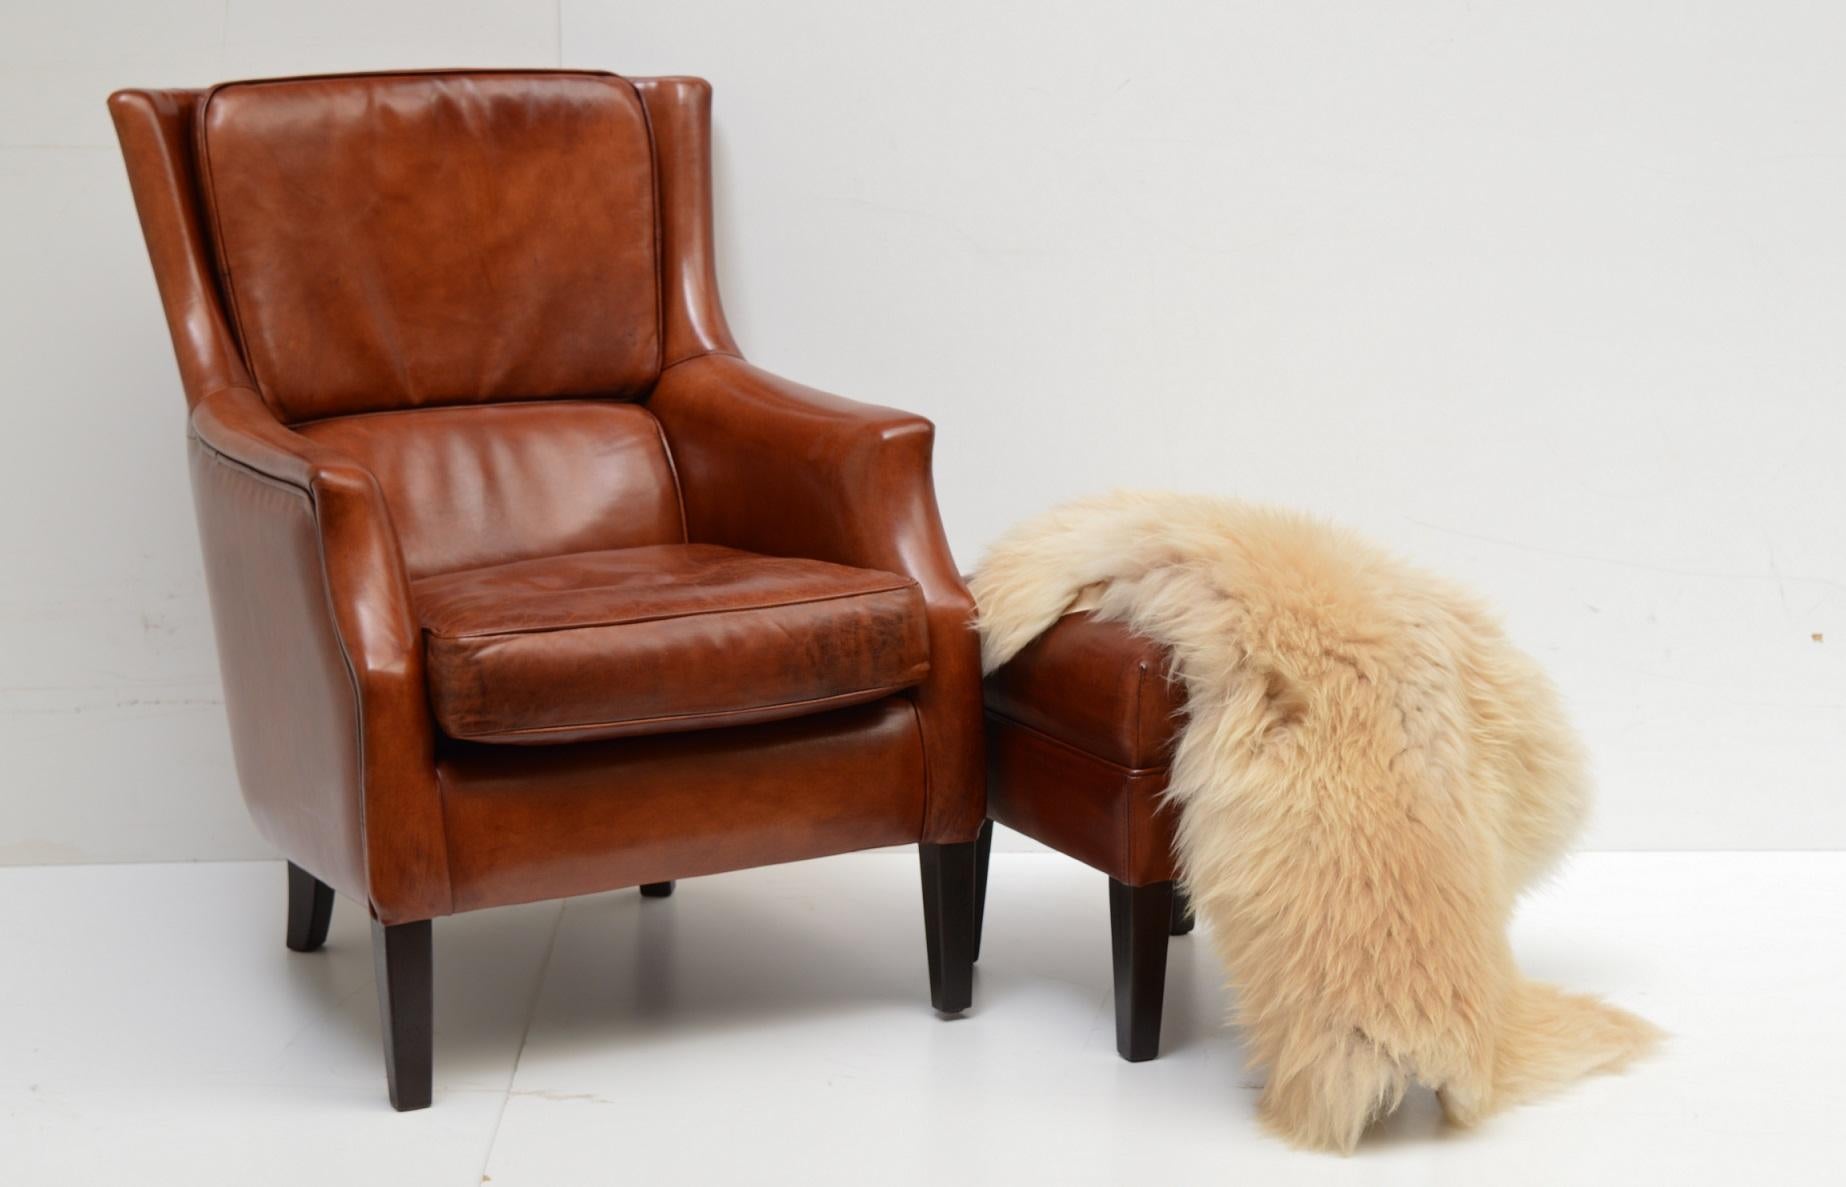 Made in the Netherlands: Elegant chair new to order for a customer who wanted to combine his Chesterfield couch with a more plain model chair. Without the buttons we make a range of sheep hide upholstered furniture to fit with Chesterfield items.